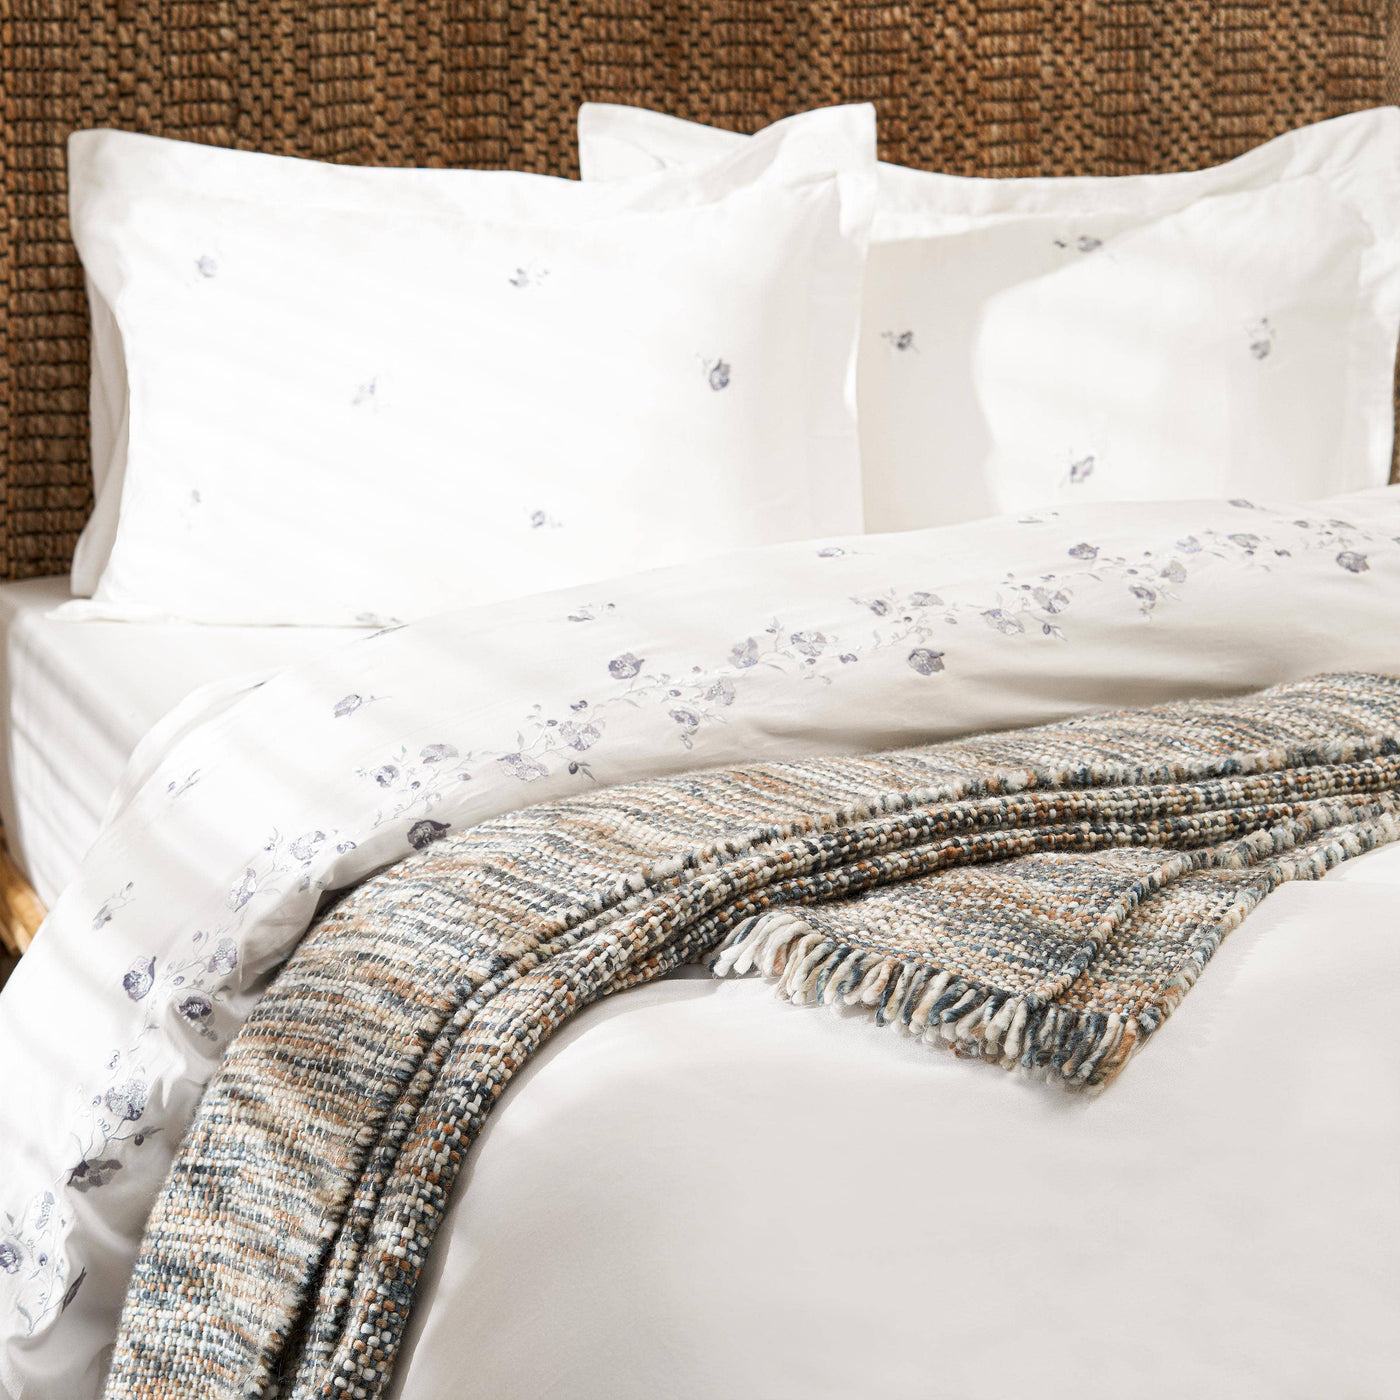 Elizabeth Flower Embroidered 100% Turkish Cotton 210 TC Duvet Cover + Fitted Sheet + 4 Pillowcases, White - Grey, King Size Bedding Sets sazy.com